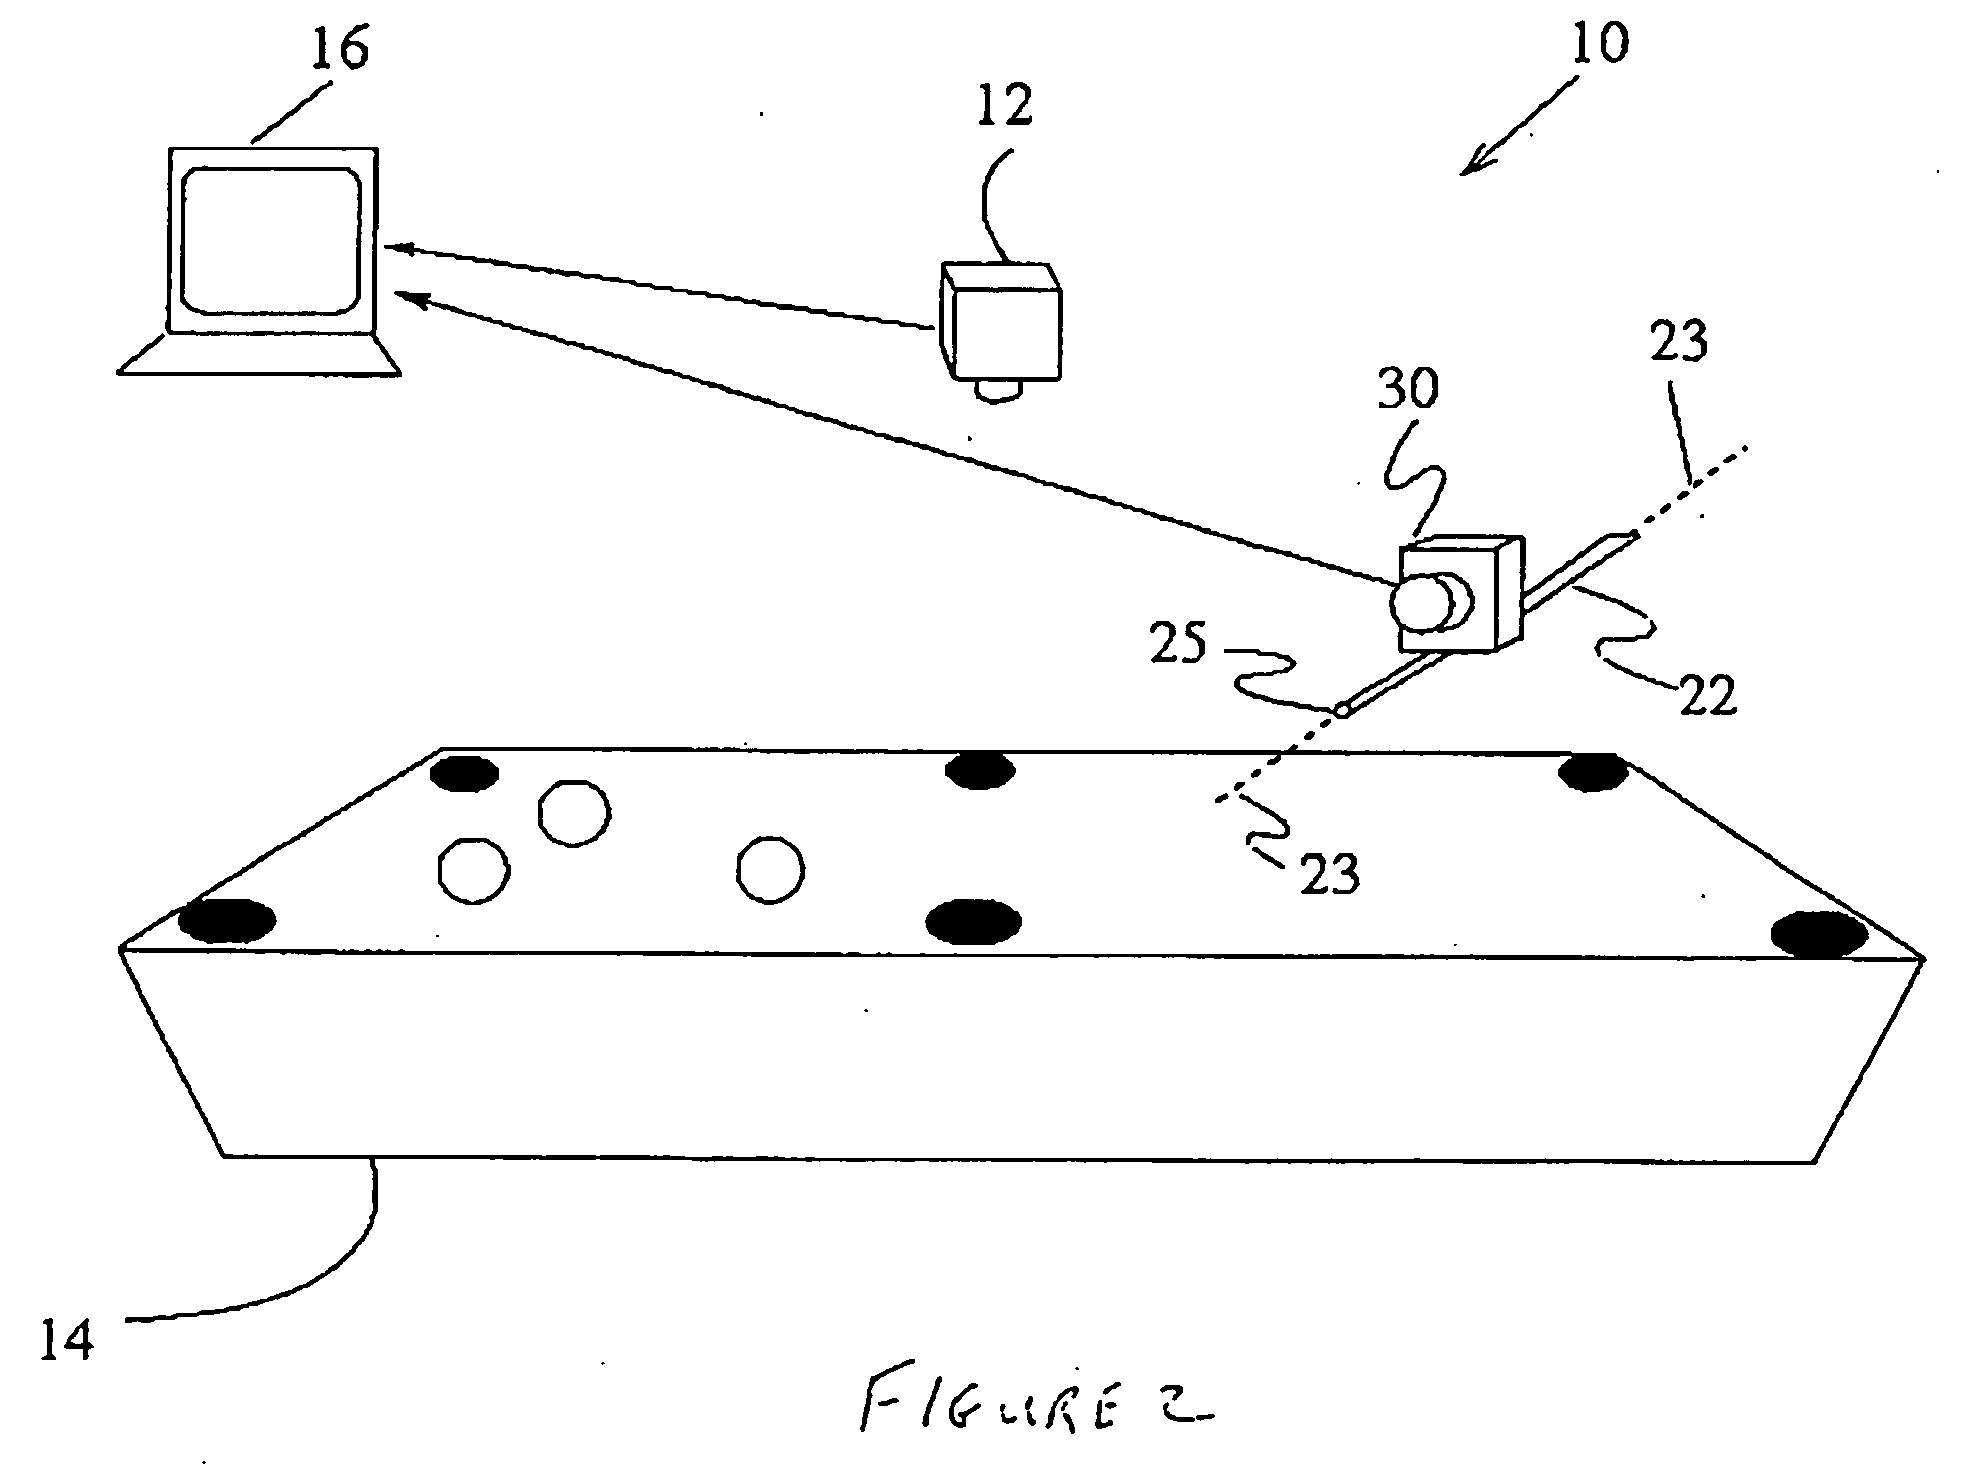 Method and apparatus for positional error correction in a robotic pool systems using a cue-aligned local camera